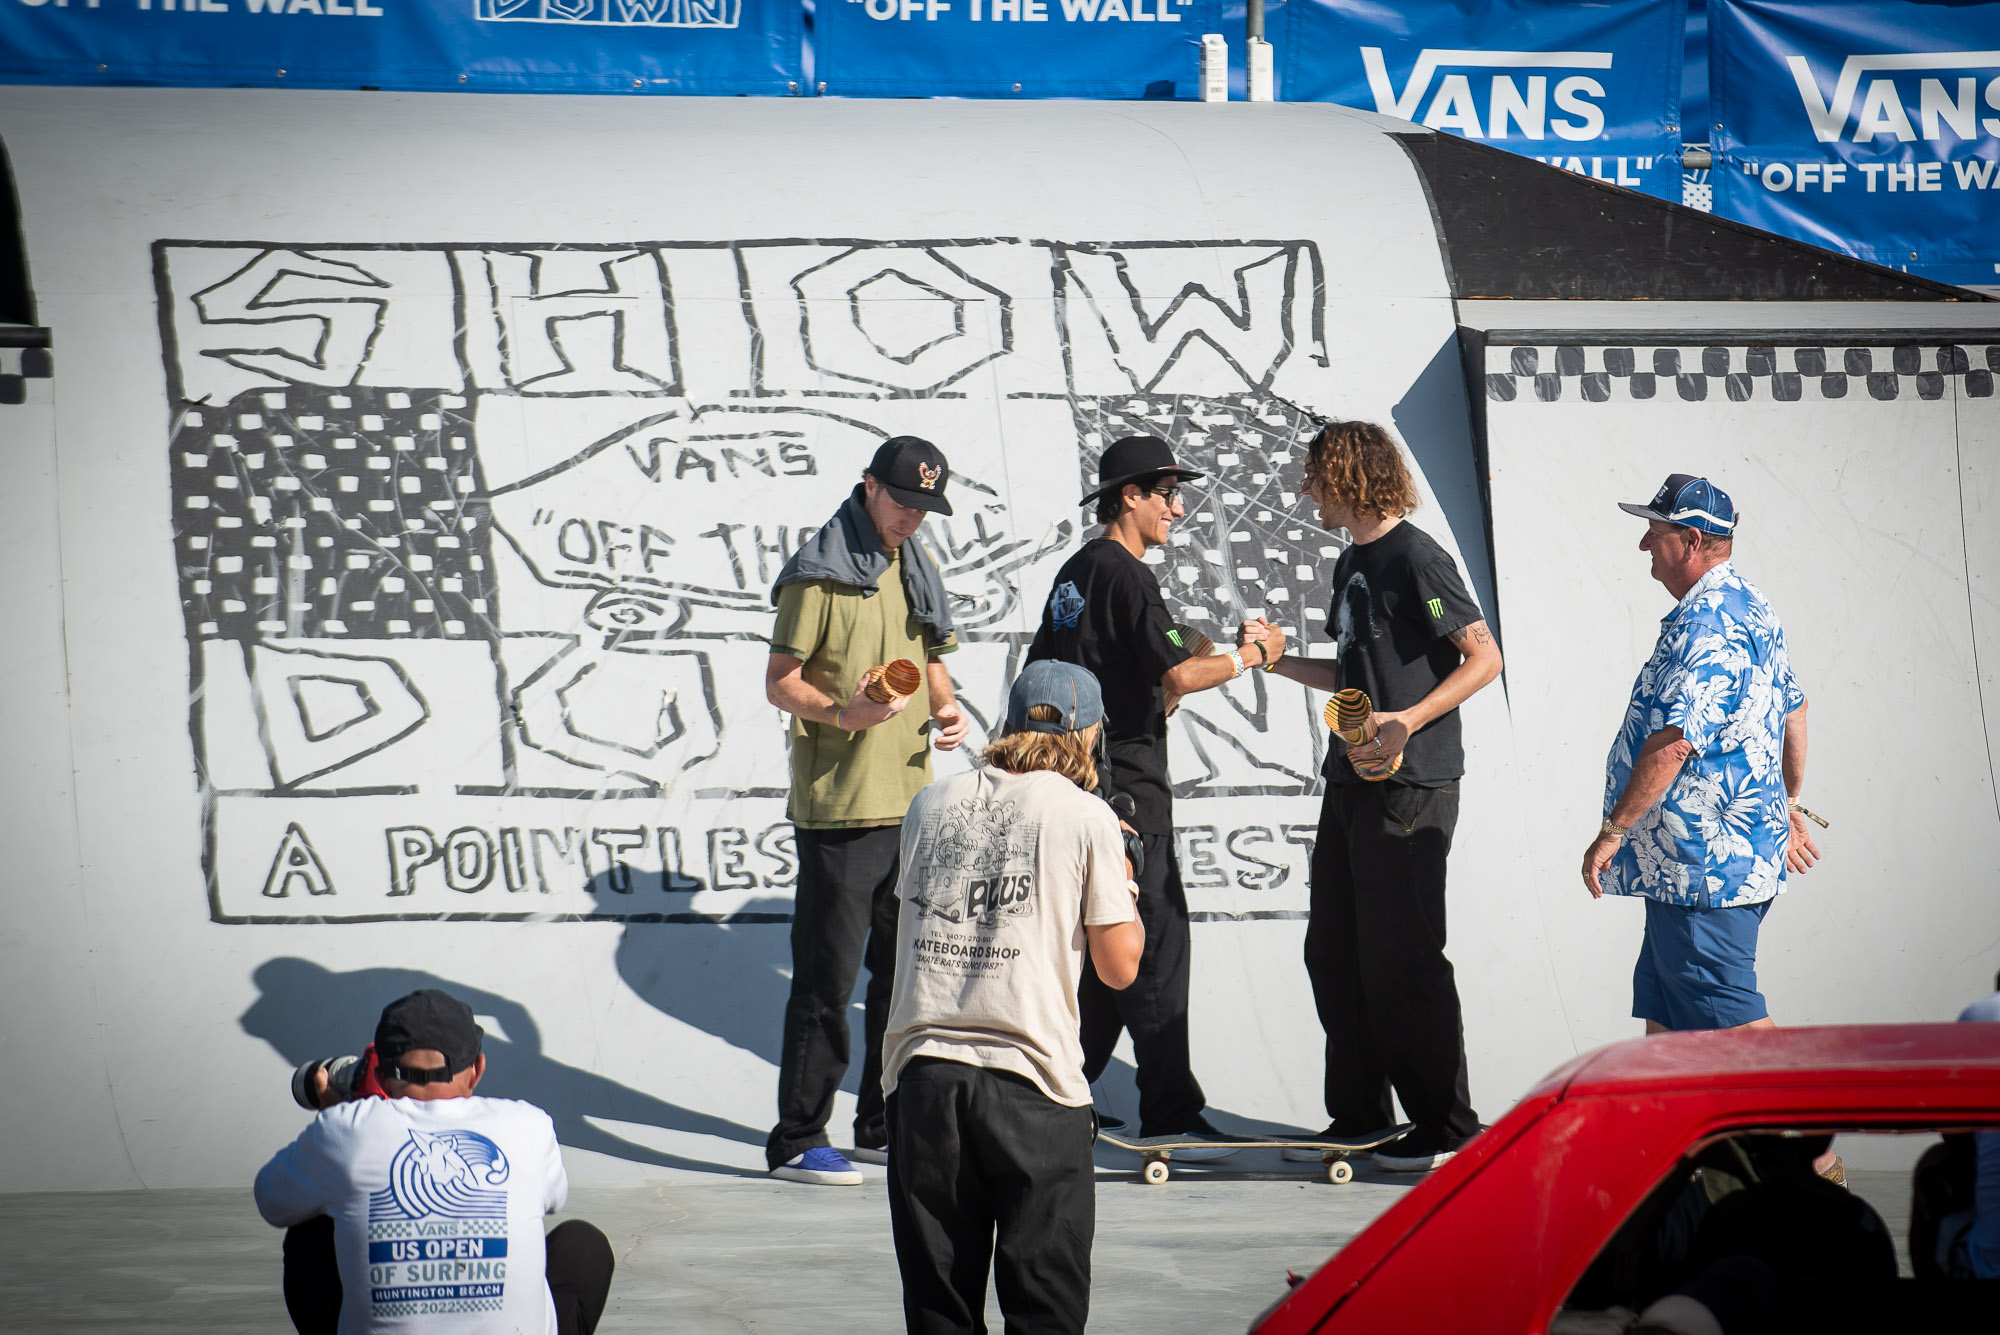 Monster Energy congratulates its skateboarders on sweeping the Vans Showdown Podium with Gonzalez taking first place, Hoban second place, and Taylor landing in Third Place during the Vans US Open